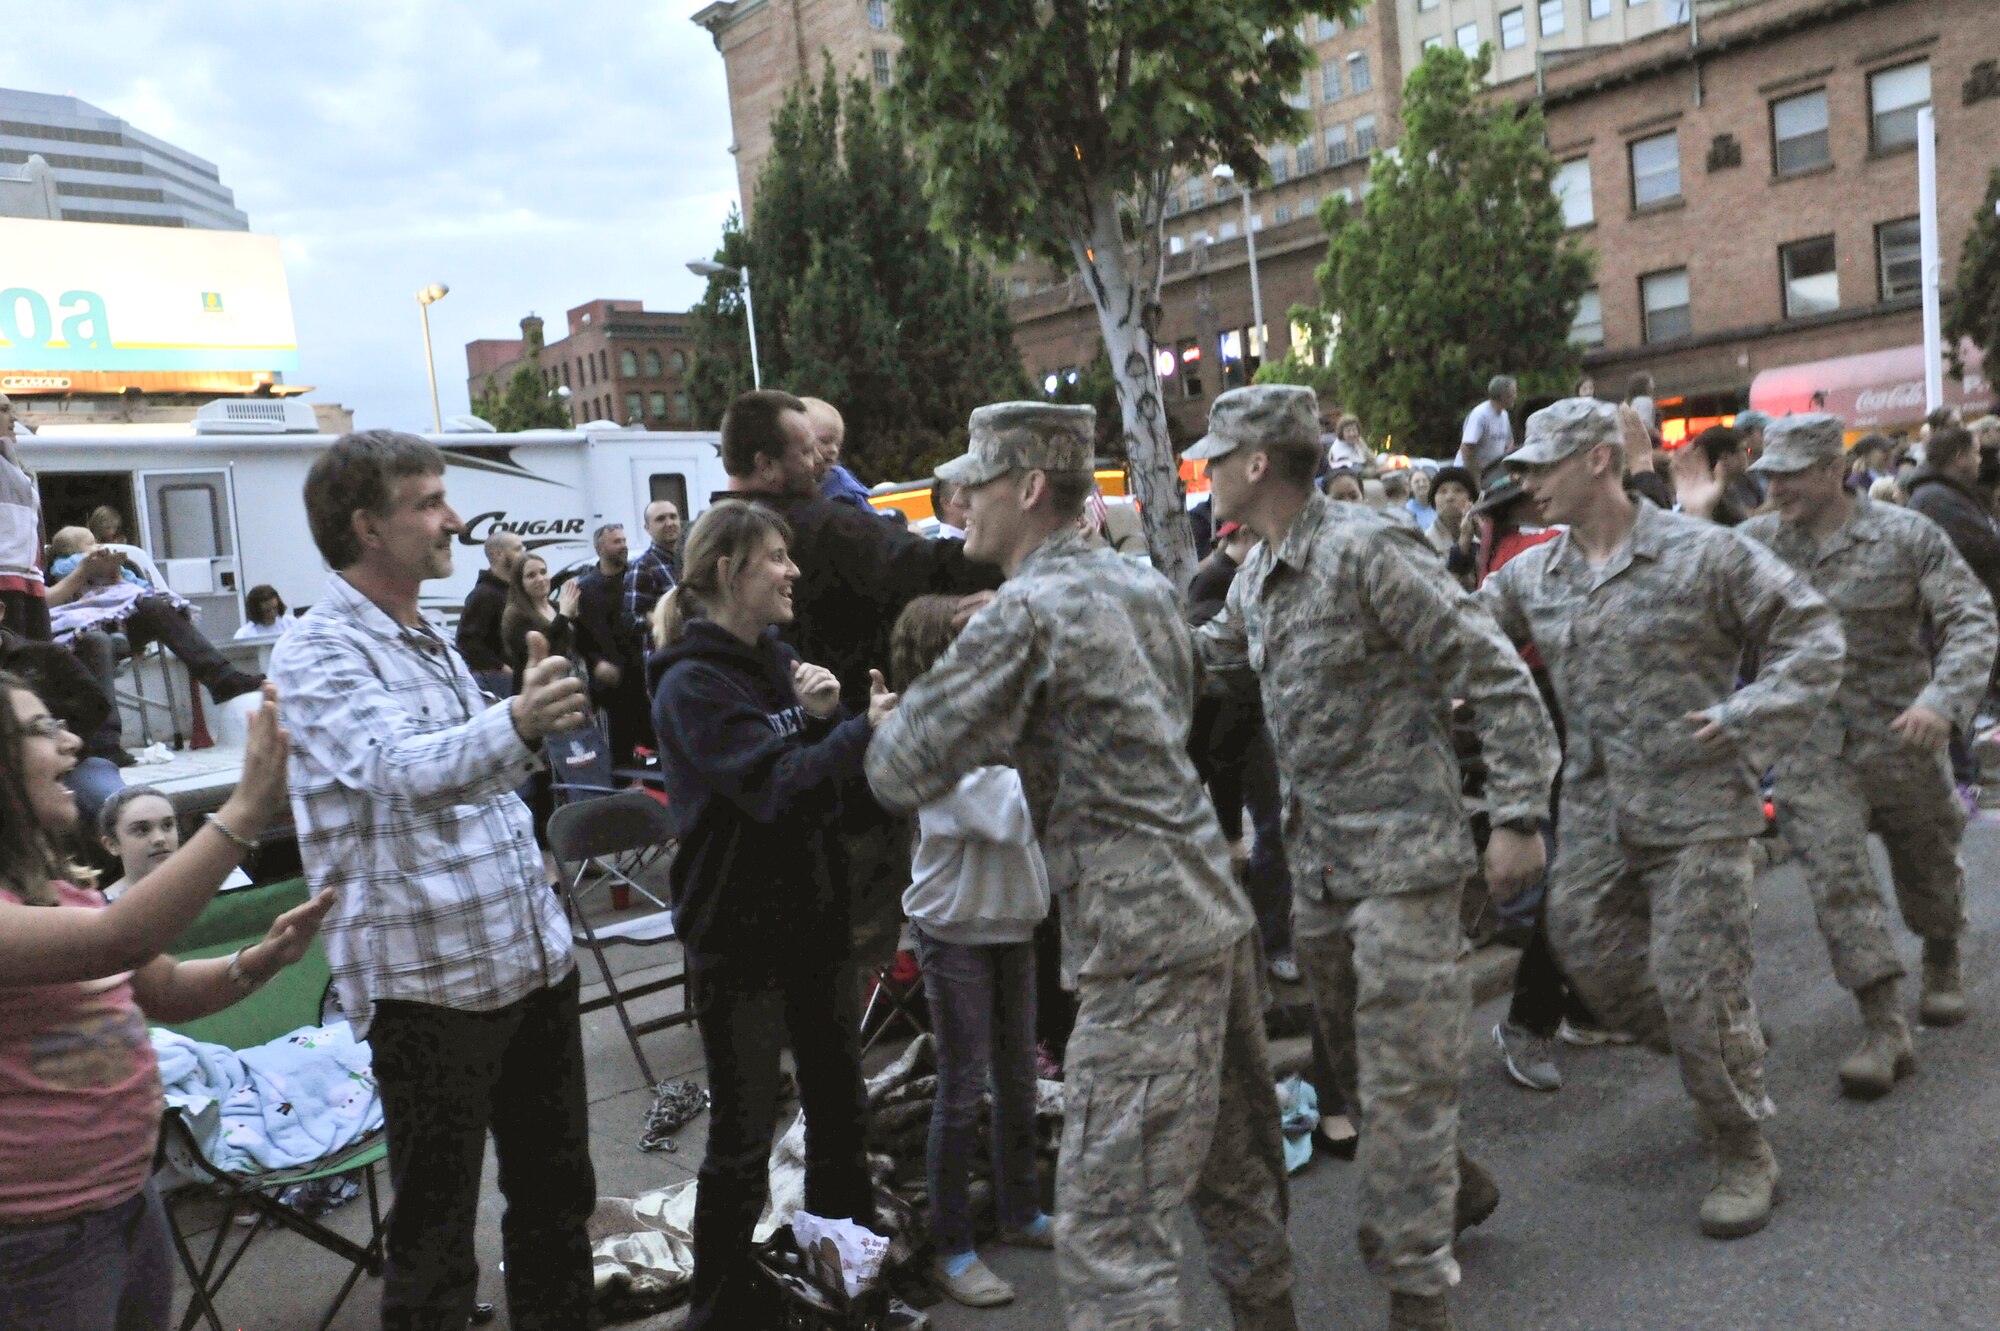 Members for team Fairchild shake hands with the crowd during the Lilac Festival 2014 Armed Forced Torchlight Parade in Spokane Wash., May 17, 2014. The parade is the largest armed forces torchlight parade in the nation.  (U.S. Air Force photo by Staff Sgt. Veronica Montes/Released)